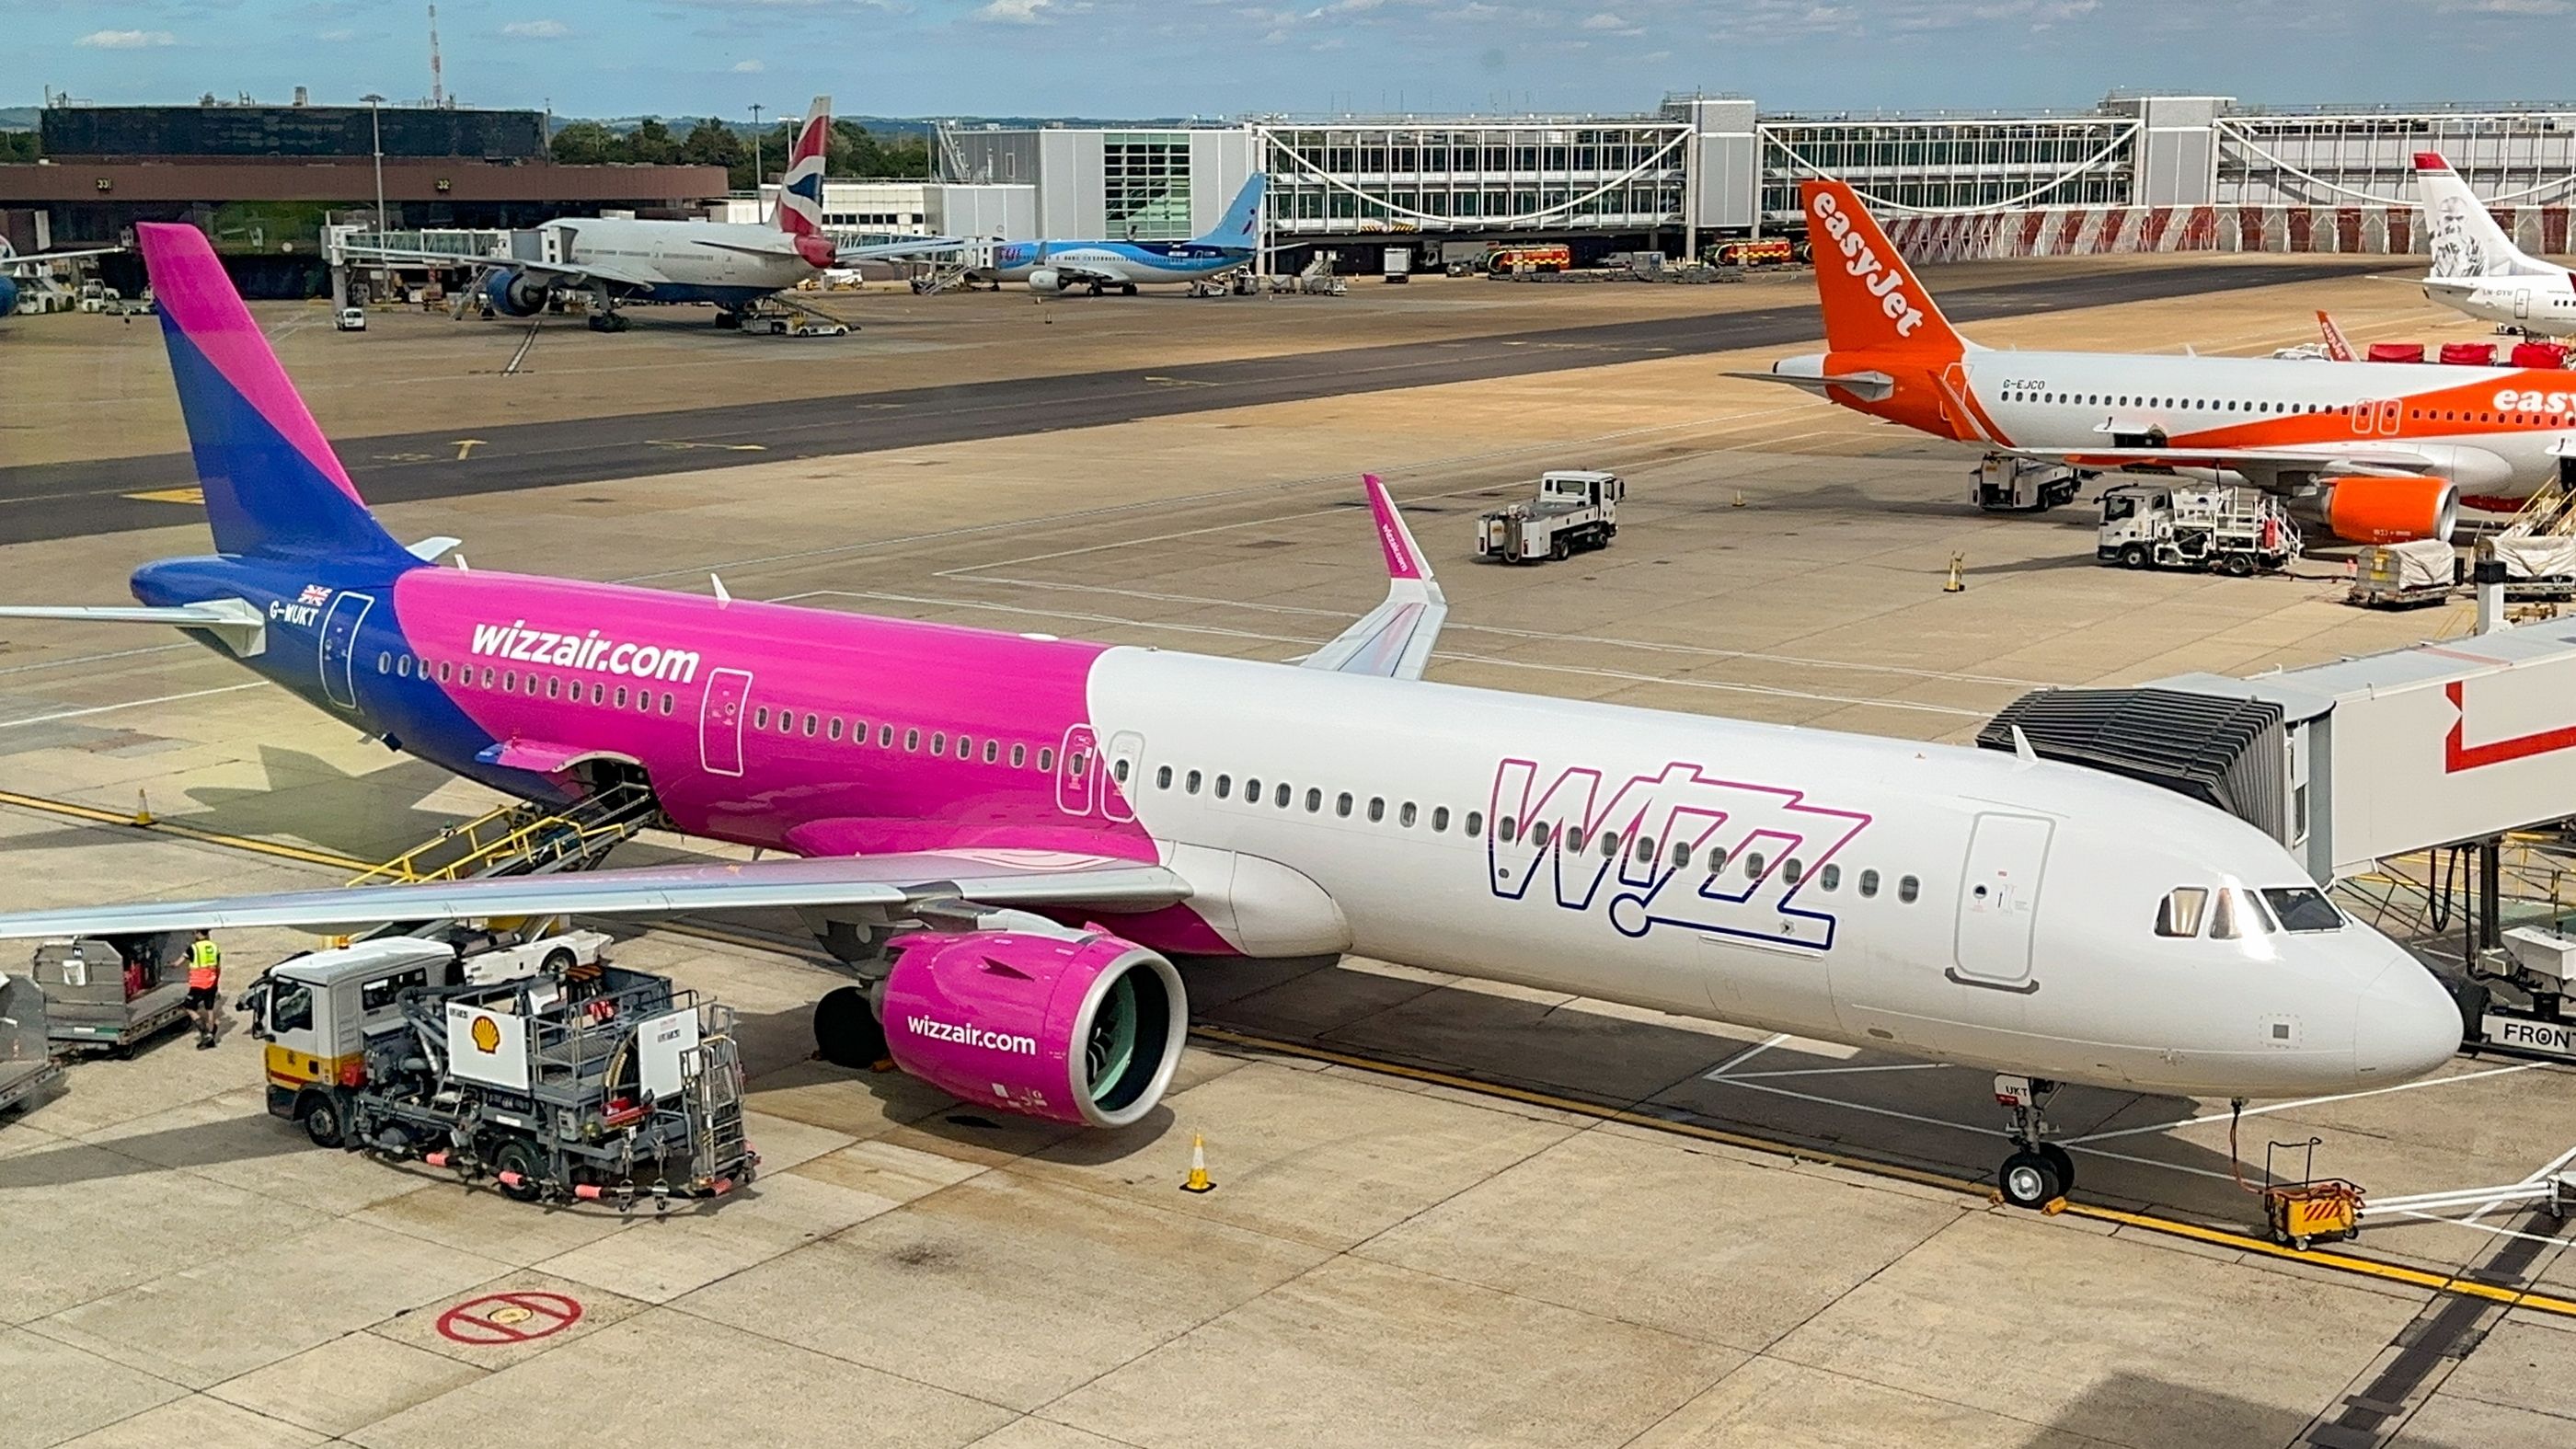 A Wizz Air A321 parked at London Gatwick Airport.